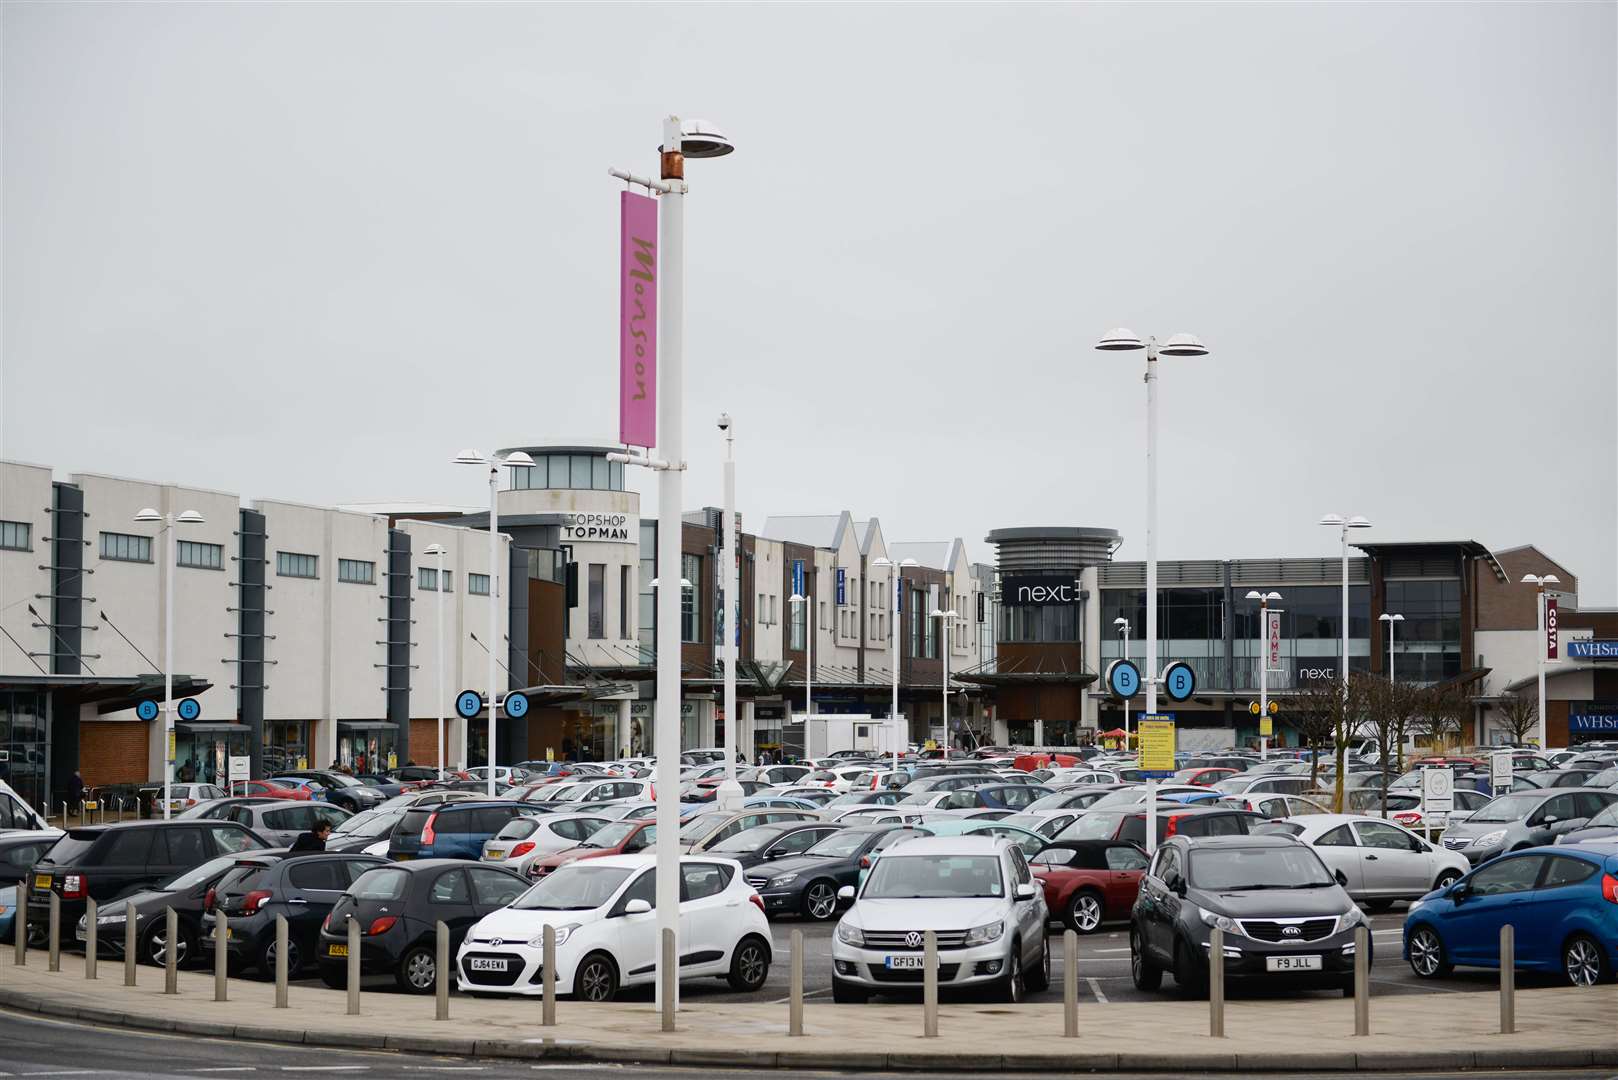 Westwood Cross in Broadstairs is offering half term deals for families